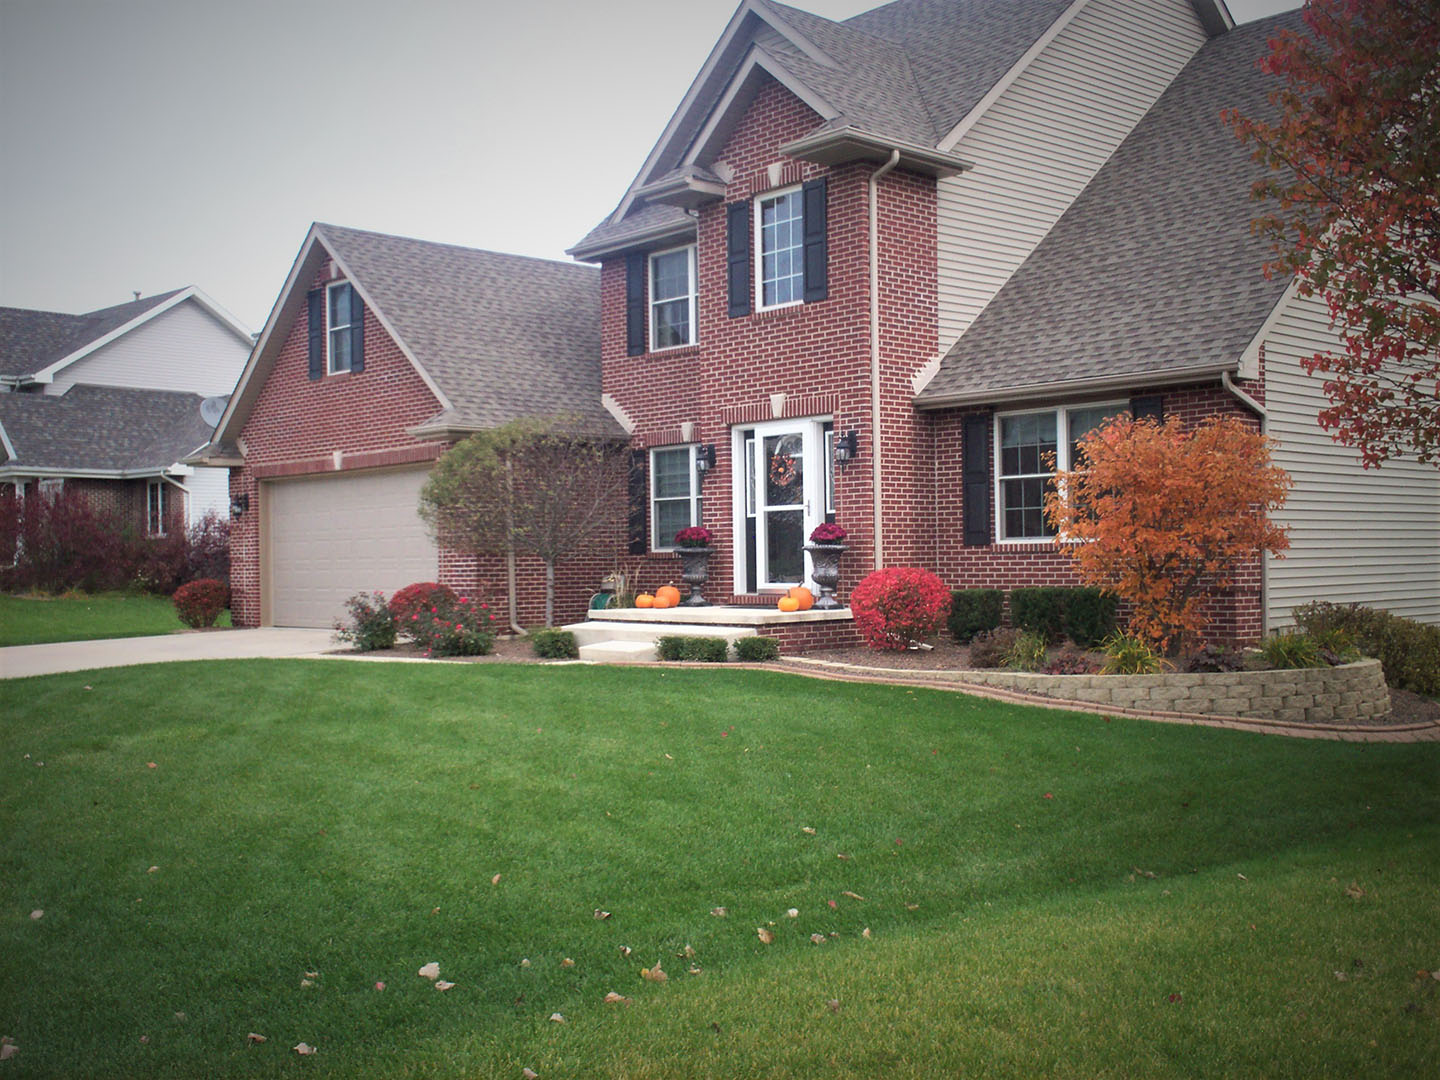 We are a complete, full service landscape company